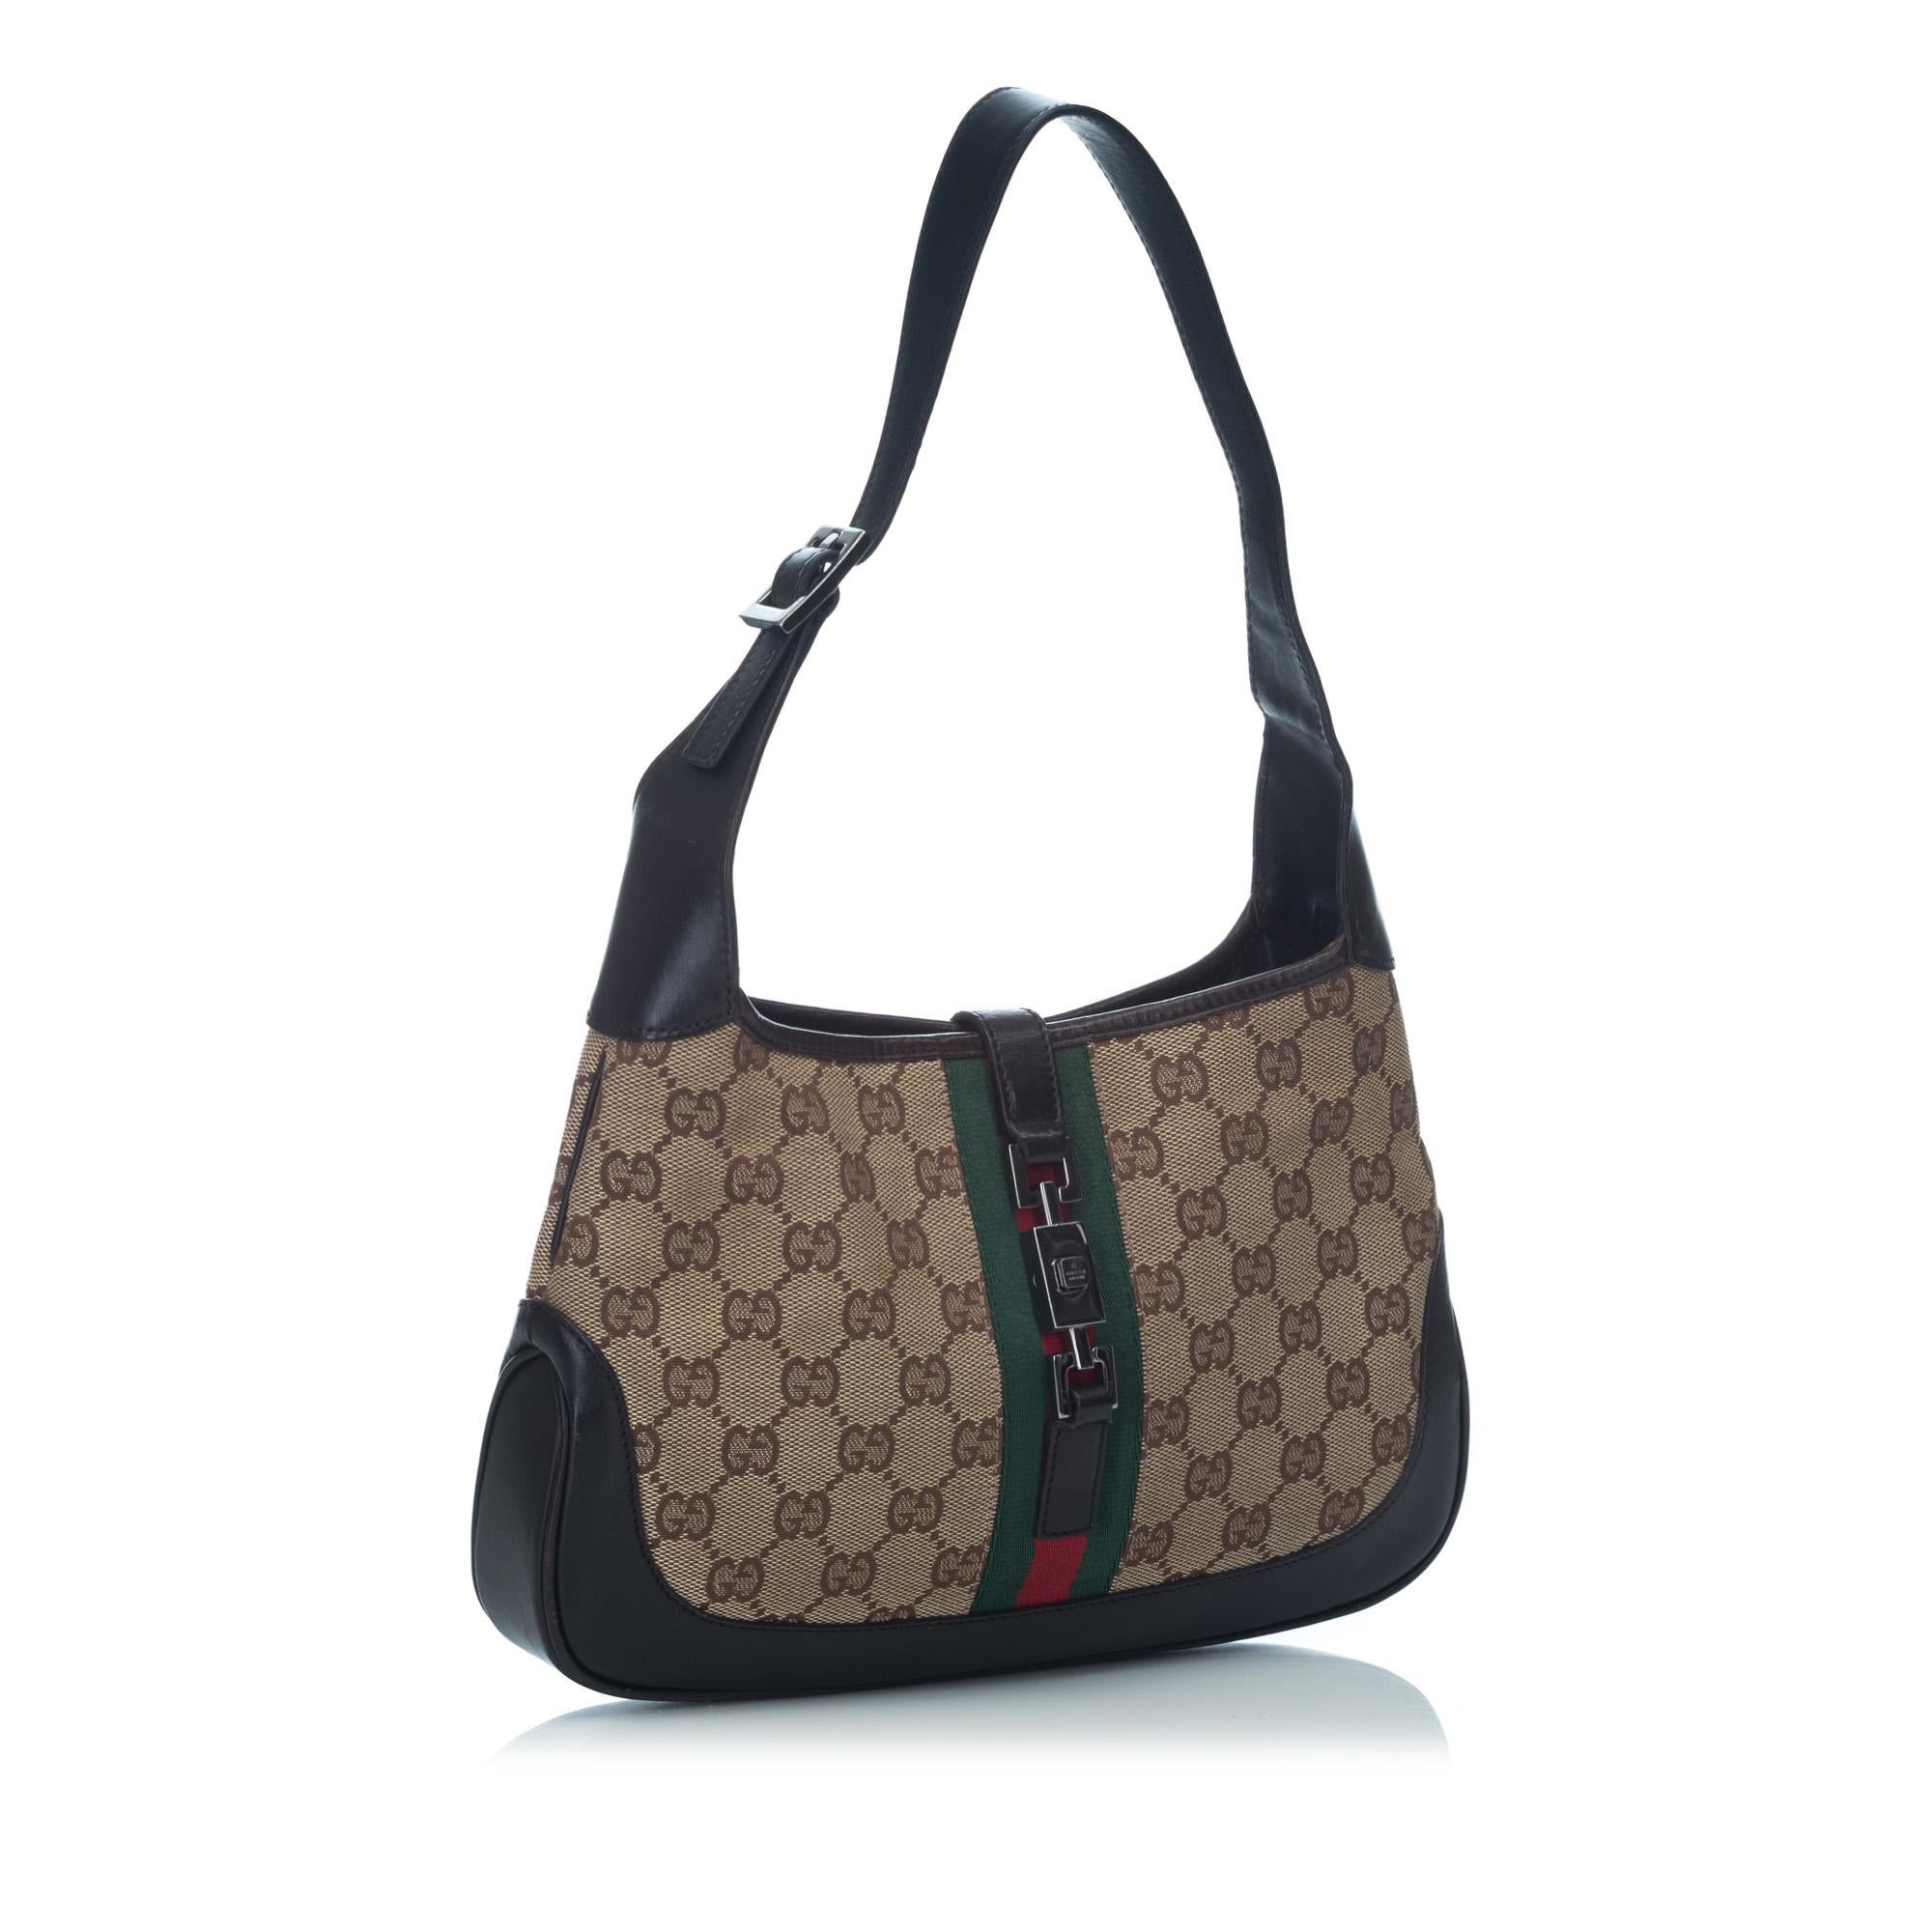 This Jackie features a canvas body with leather trim flat leather strap, open top with flat strap and push lock closure, and interior zip pocket. It carries as B+ condition rating.

Inclusions: 
This item does not come with